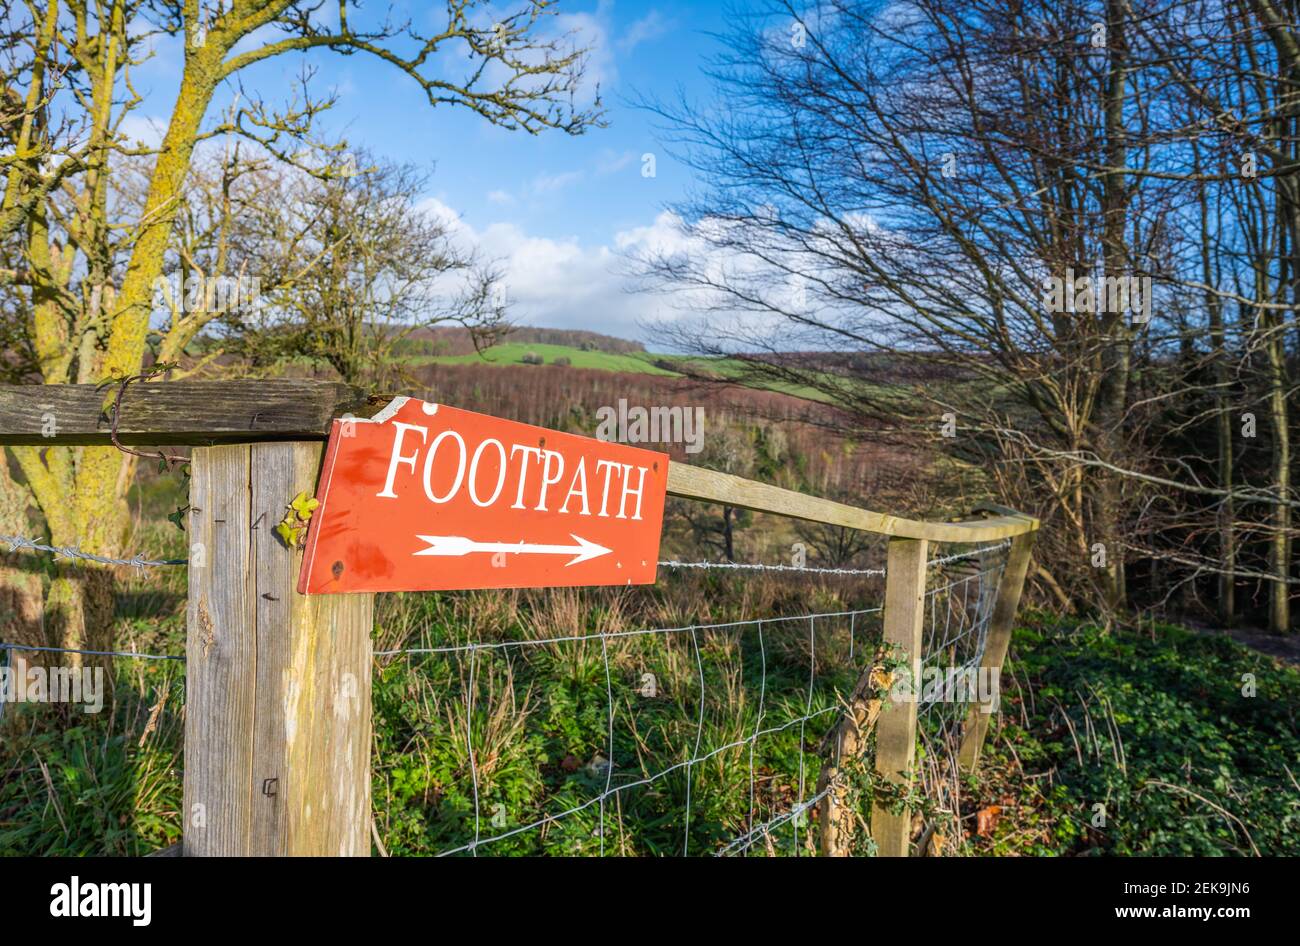 Footpath sign on a hill on private land (freely publicly accessible) on the Arundel Park Estate in Arundel, West Sussex, England, UK. Stock Photo